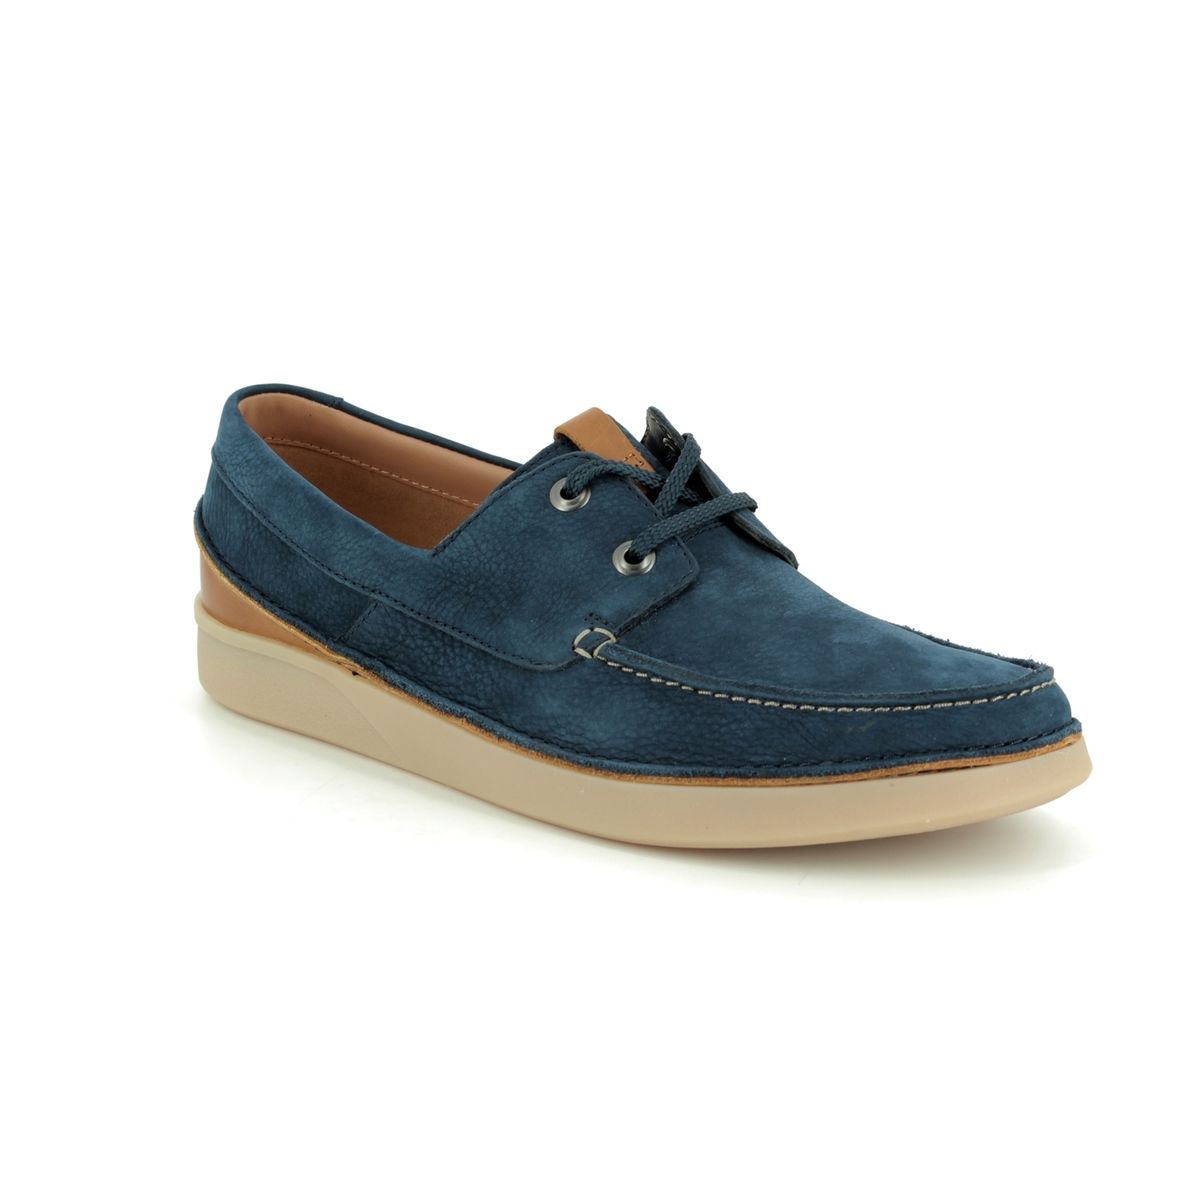 clarks shoes online sale malaysia